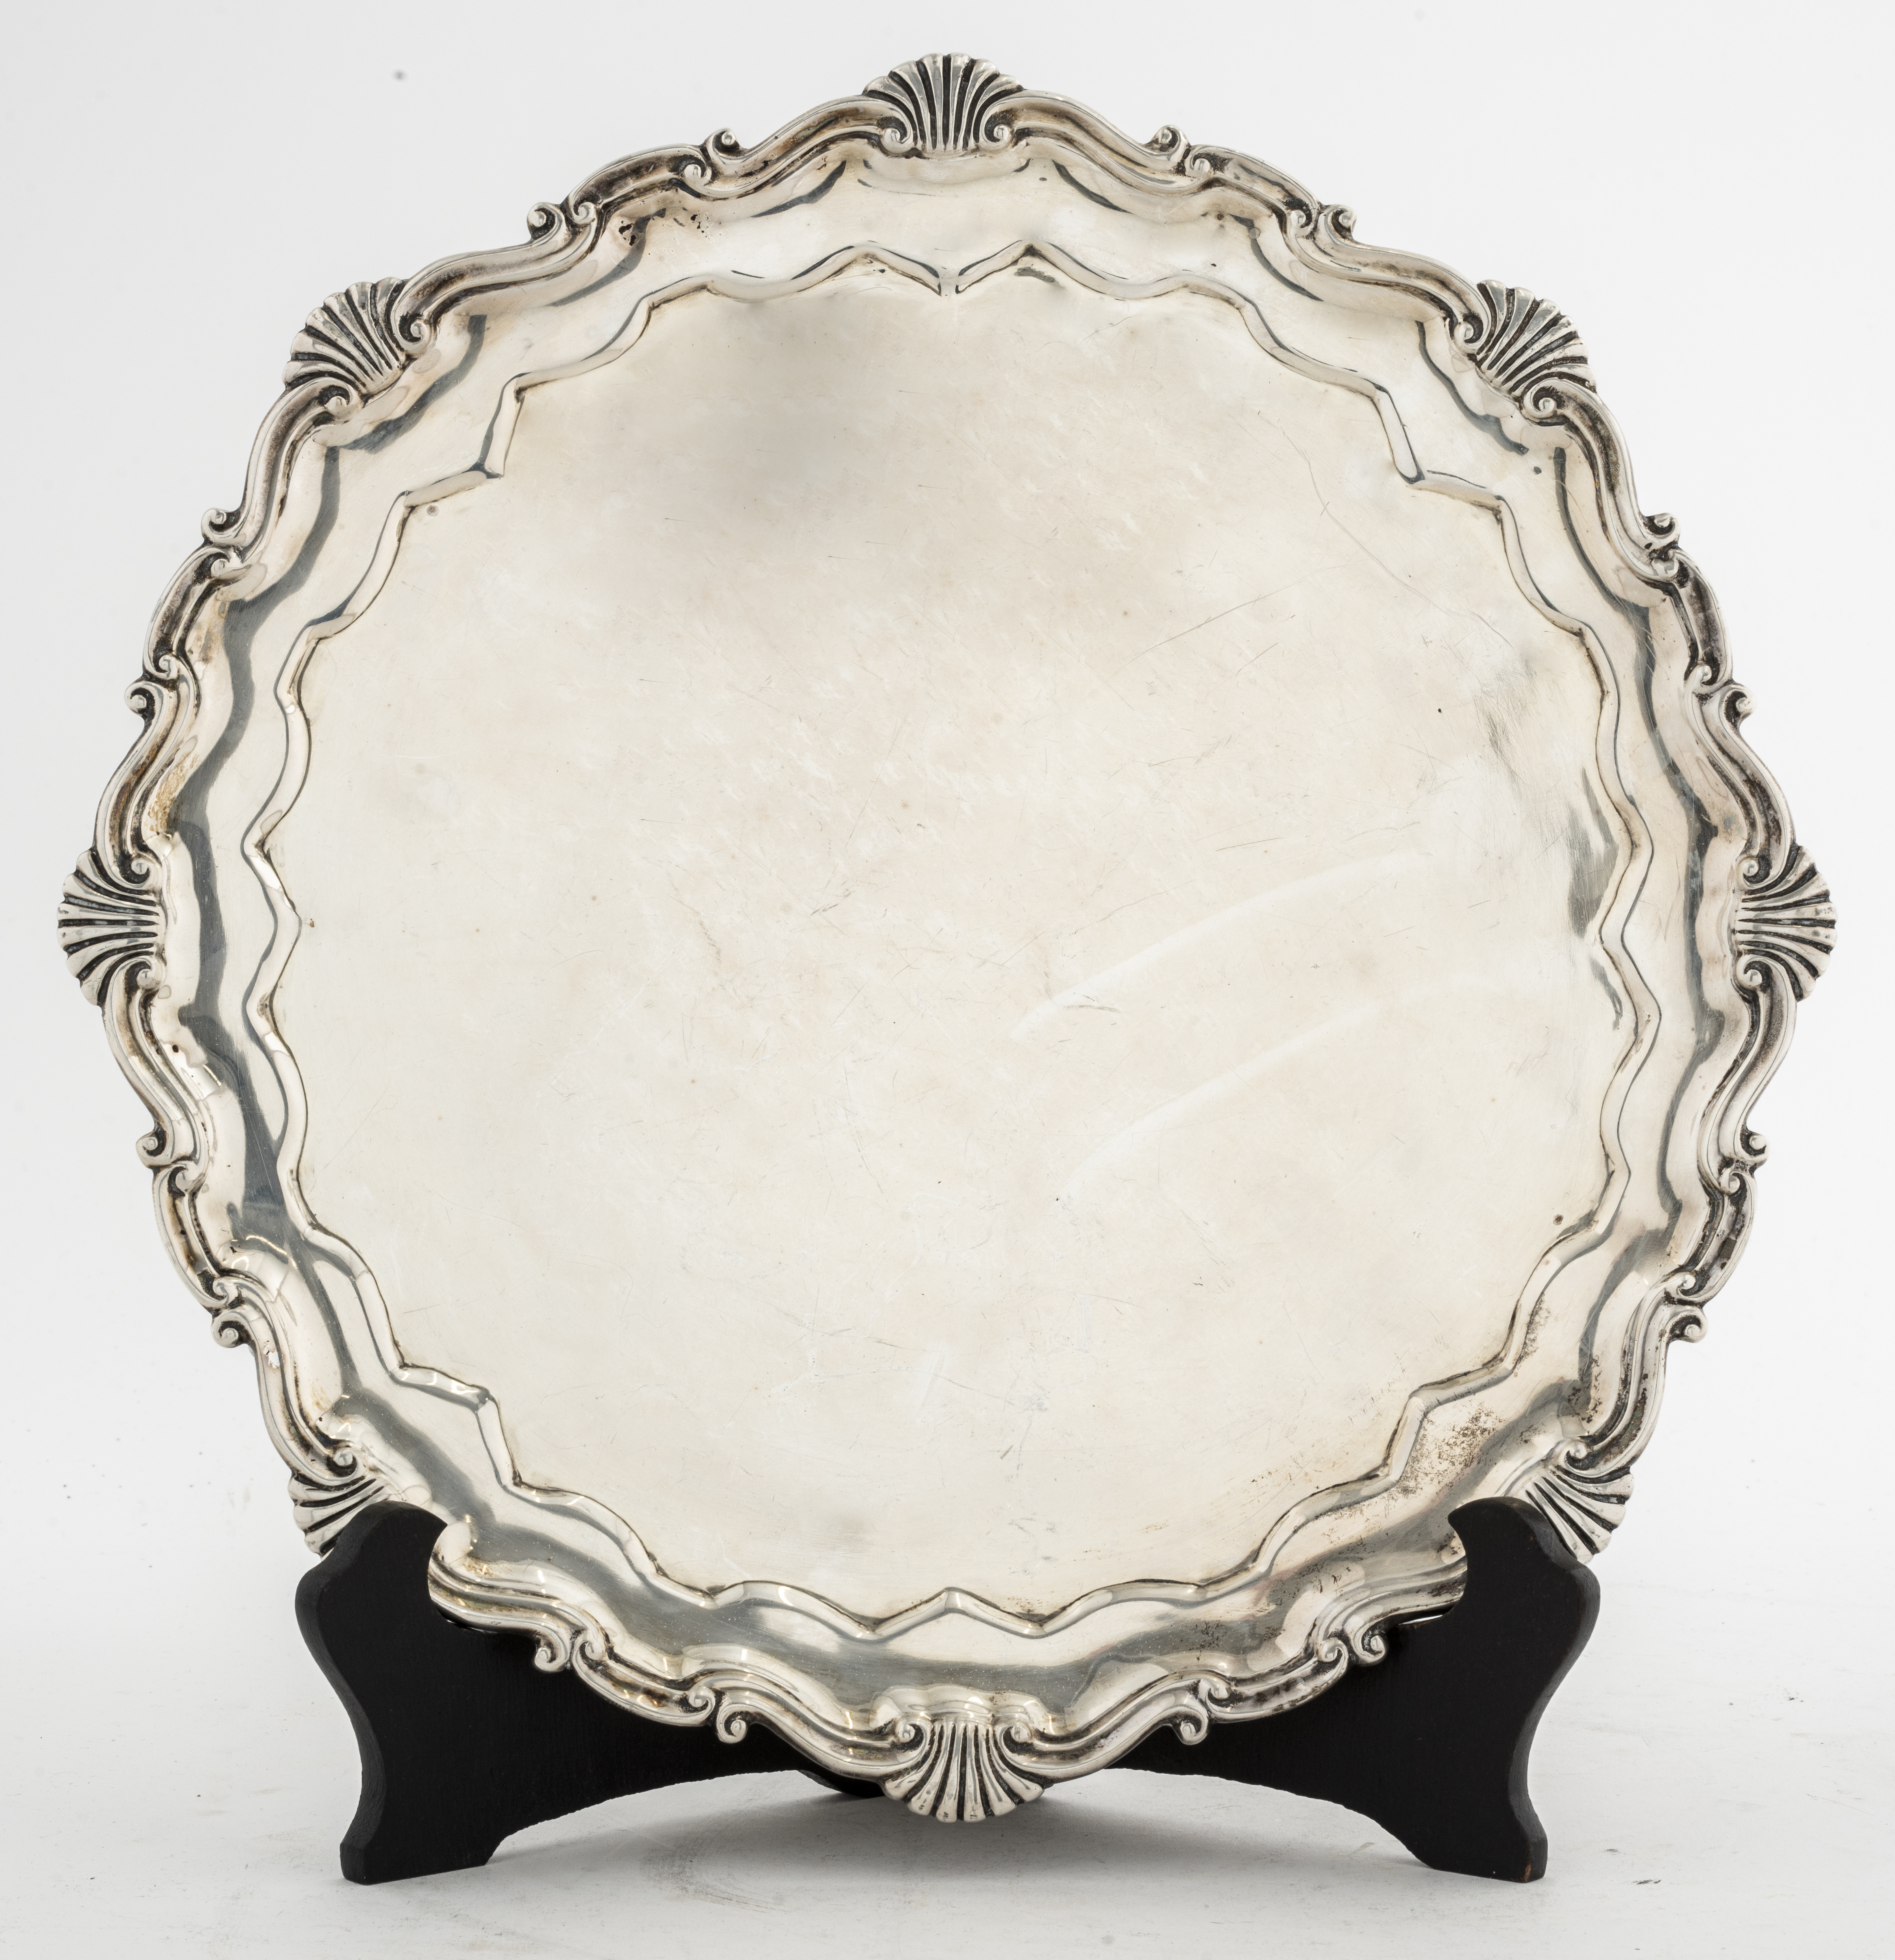 STERLING SILVER FOOTED SERVING